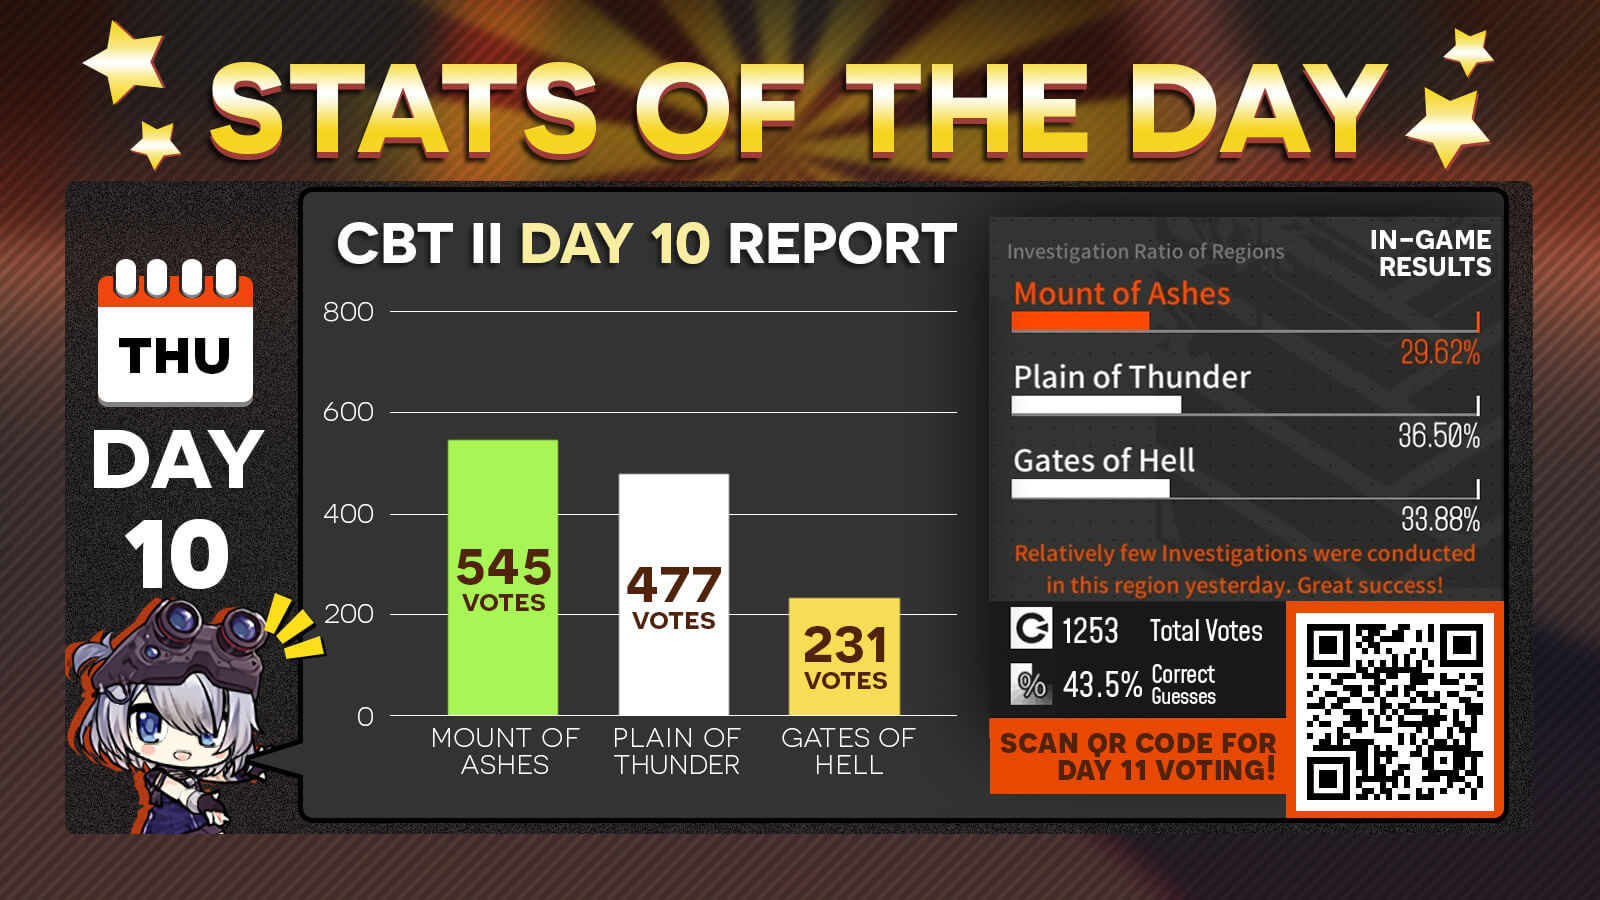 CBT II day 10 stats